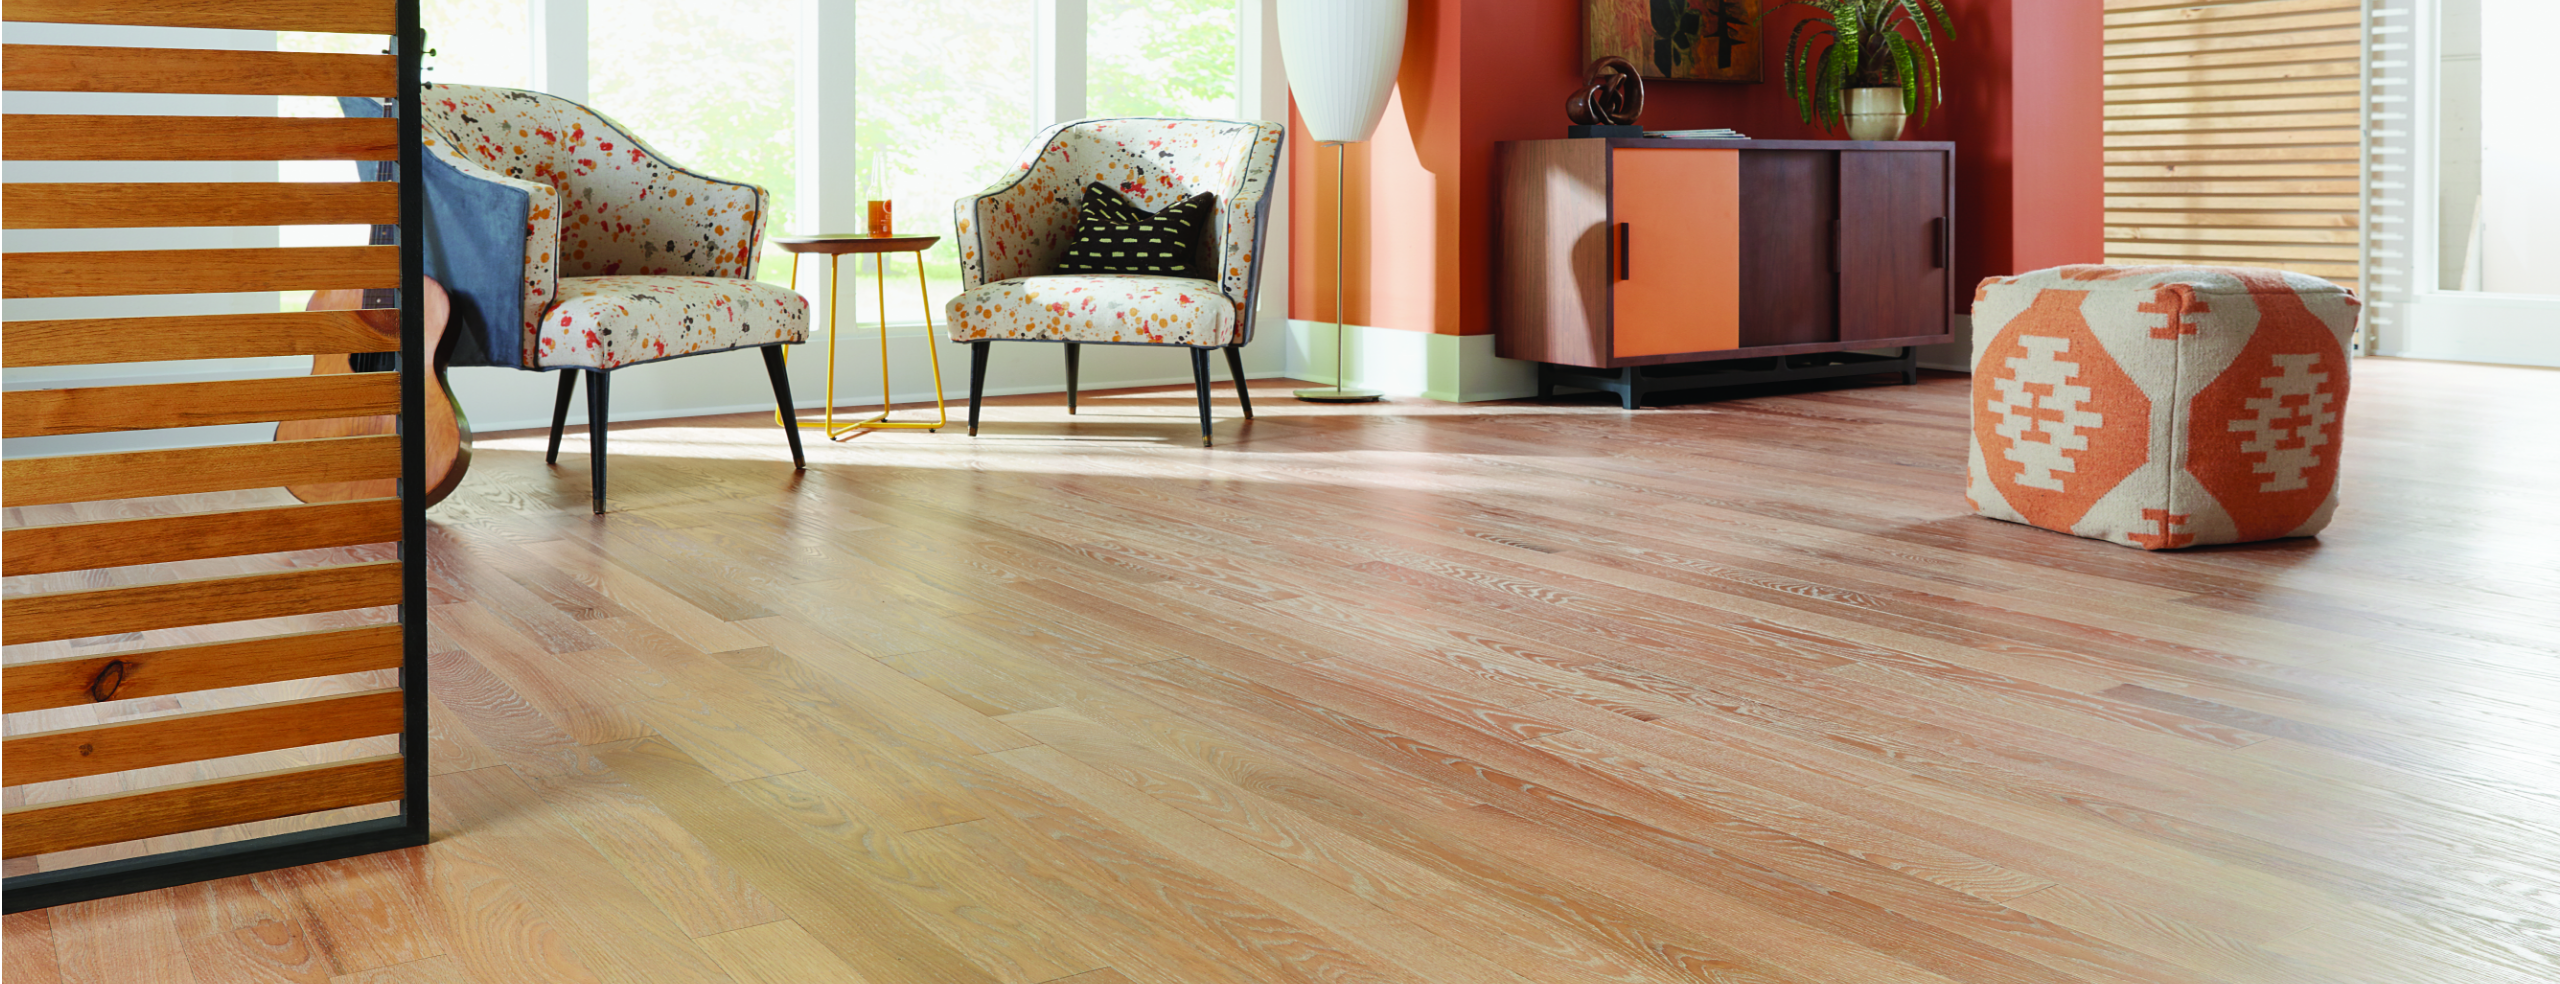 How to Mop Floors, Including Tile, Hardwood, Laminate, and More